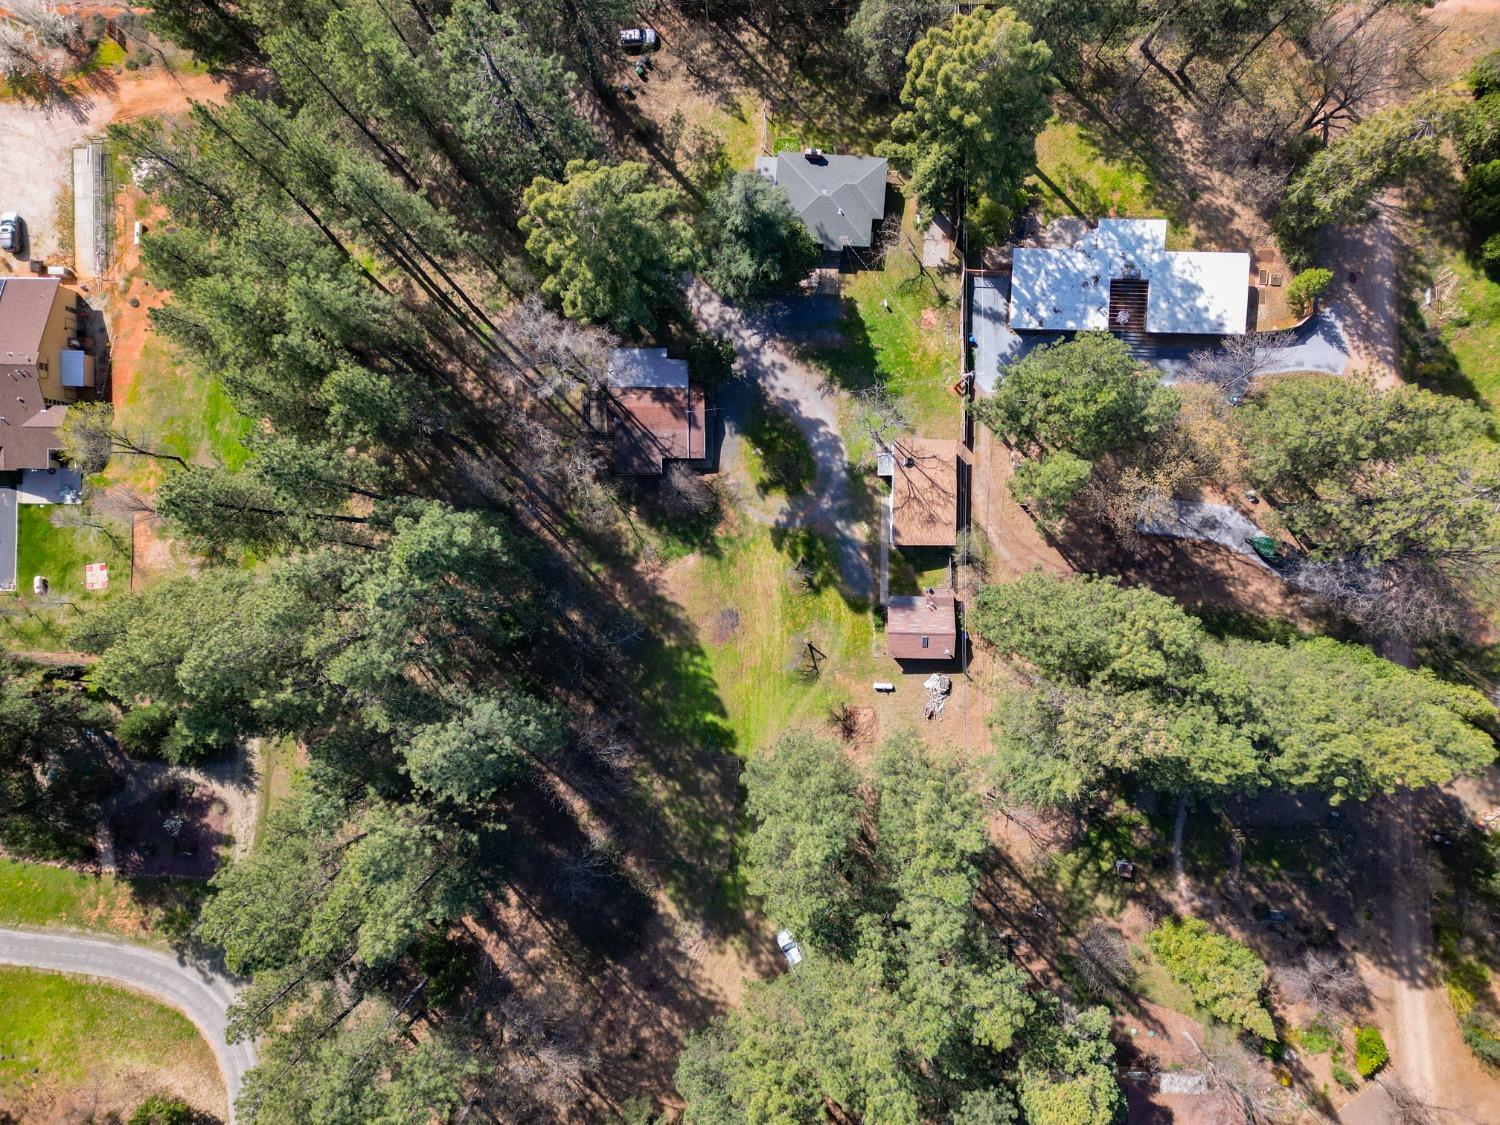 Photo of 18874 Colfax Hwy in Grass Valley, CA